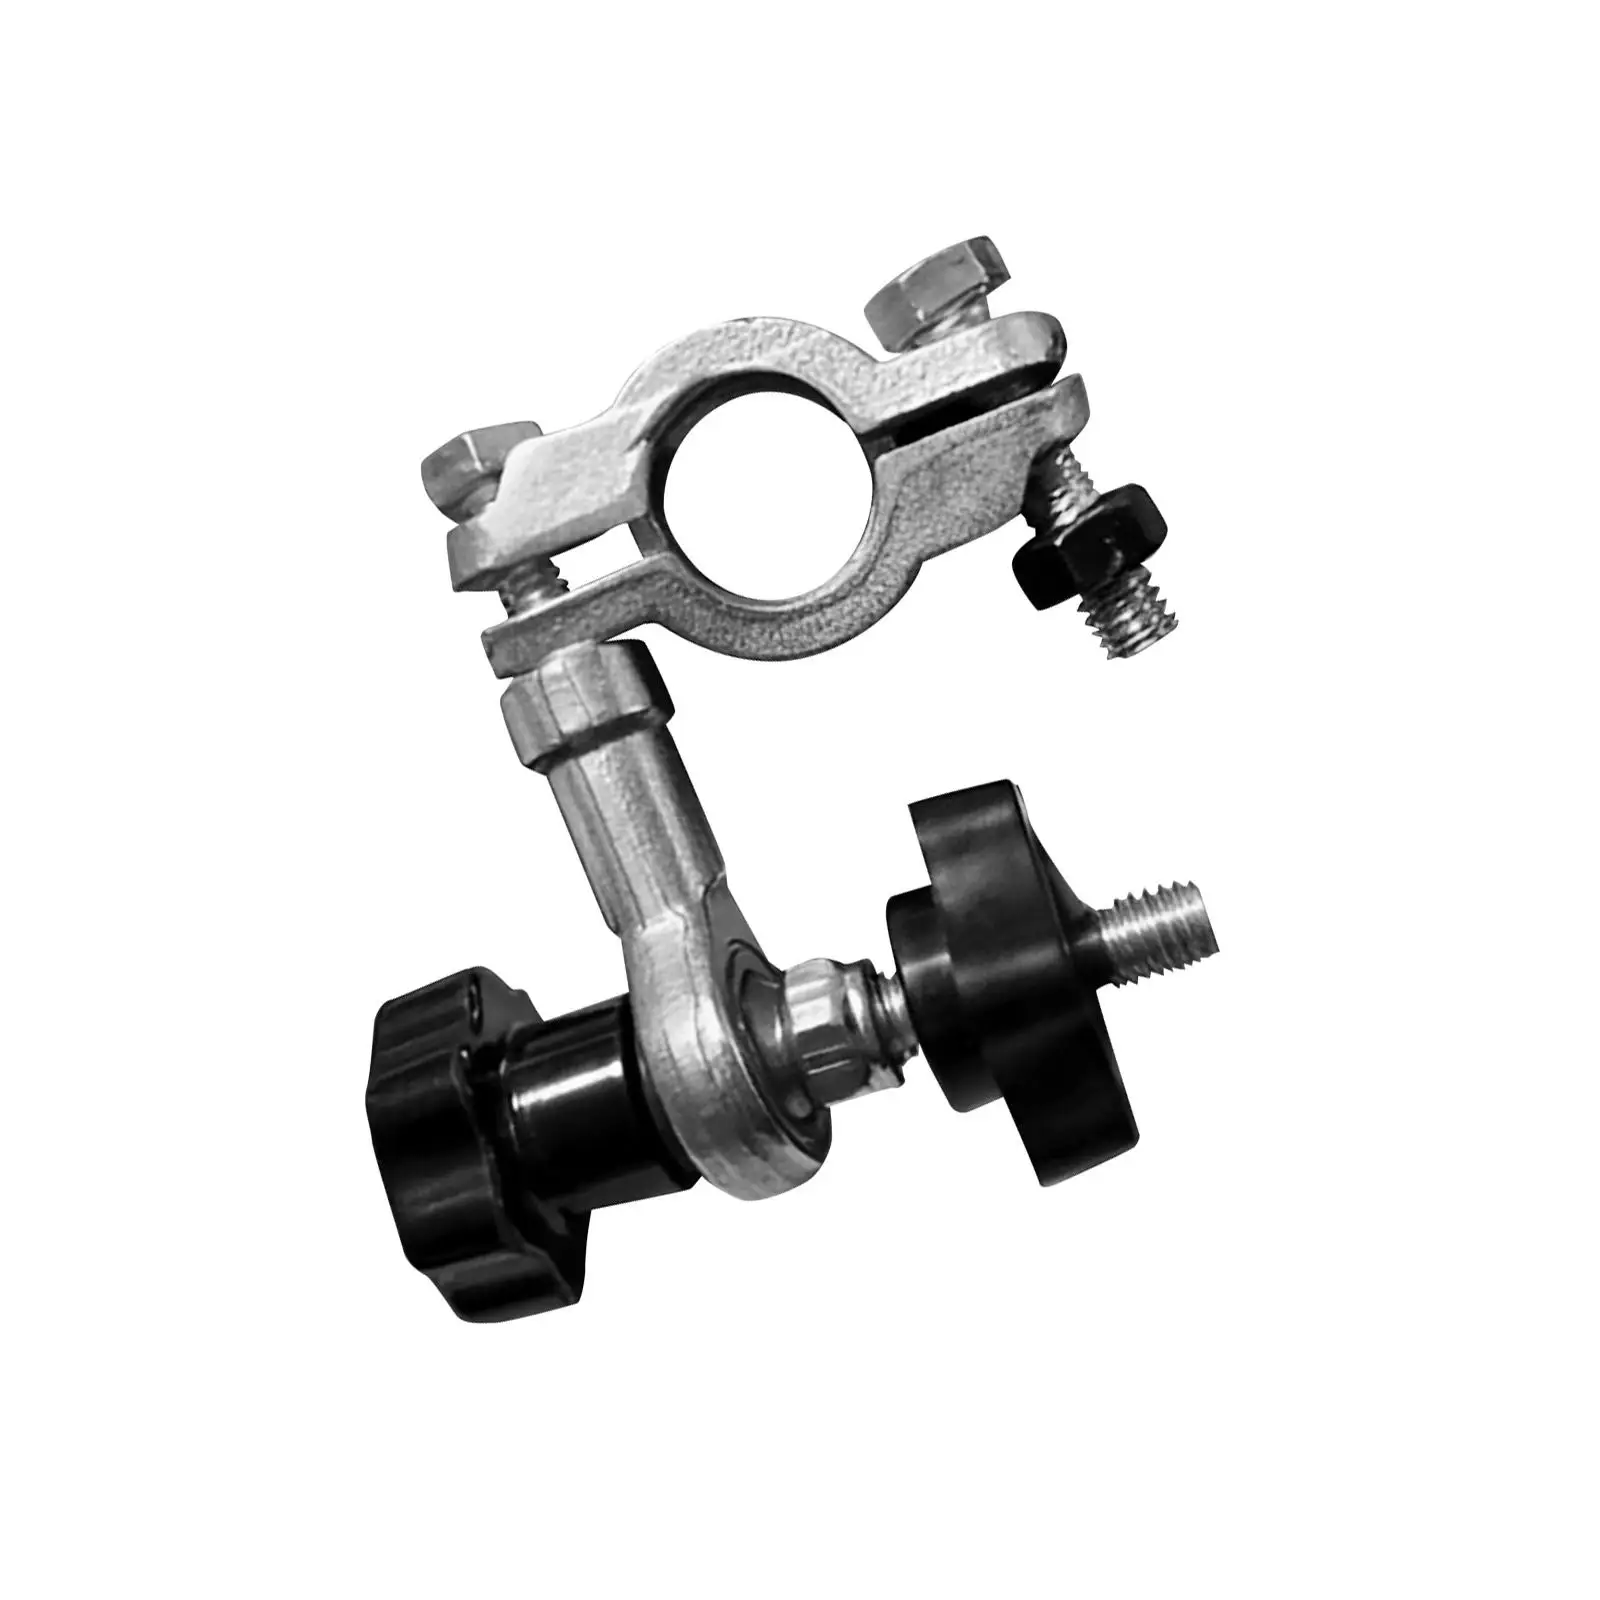 Bicycle Rear Trailer Connector Coupler Attachment Accessories for Most Bike